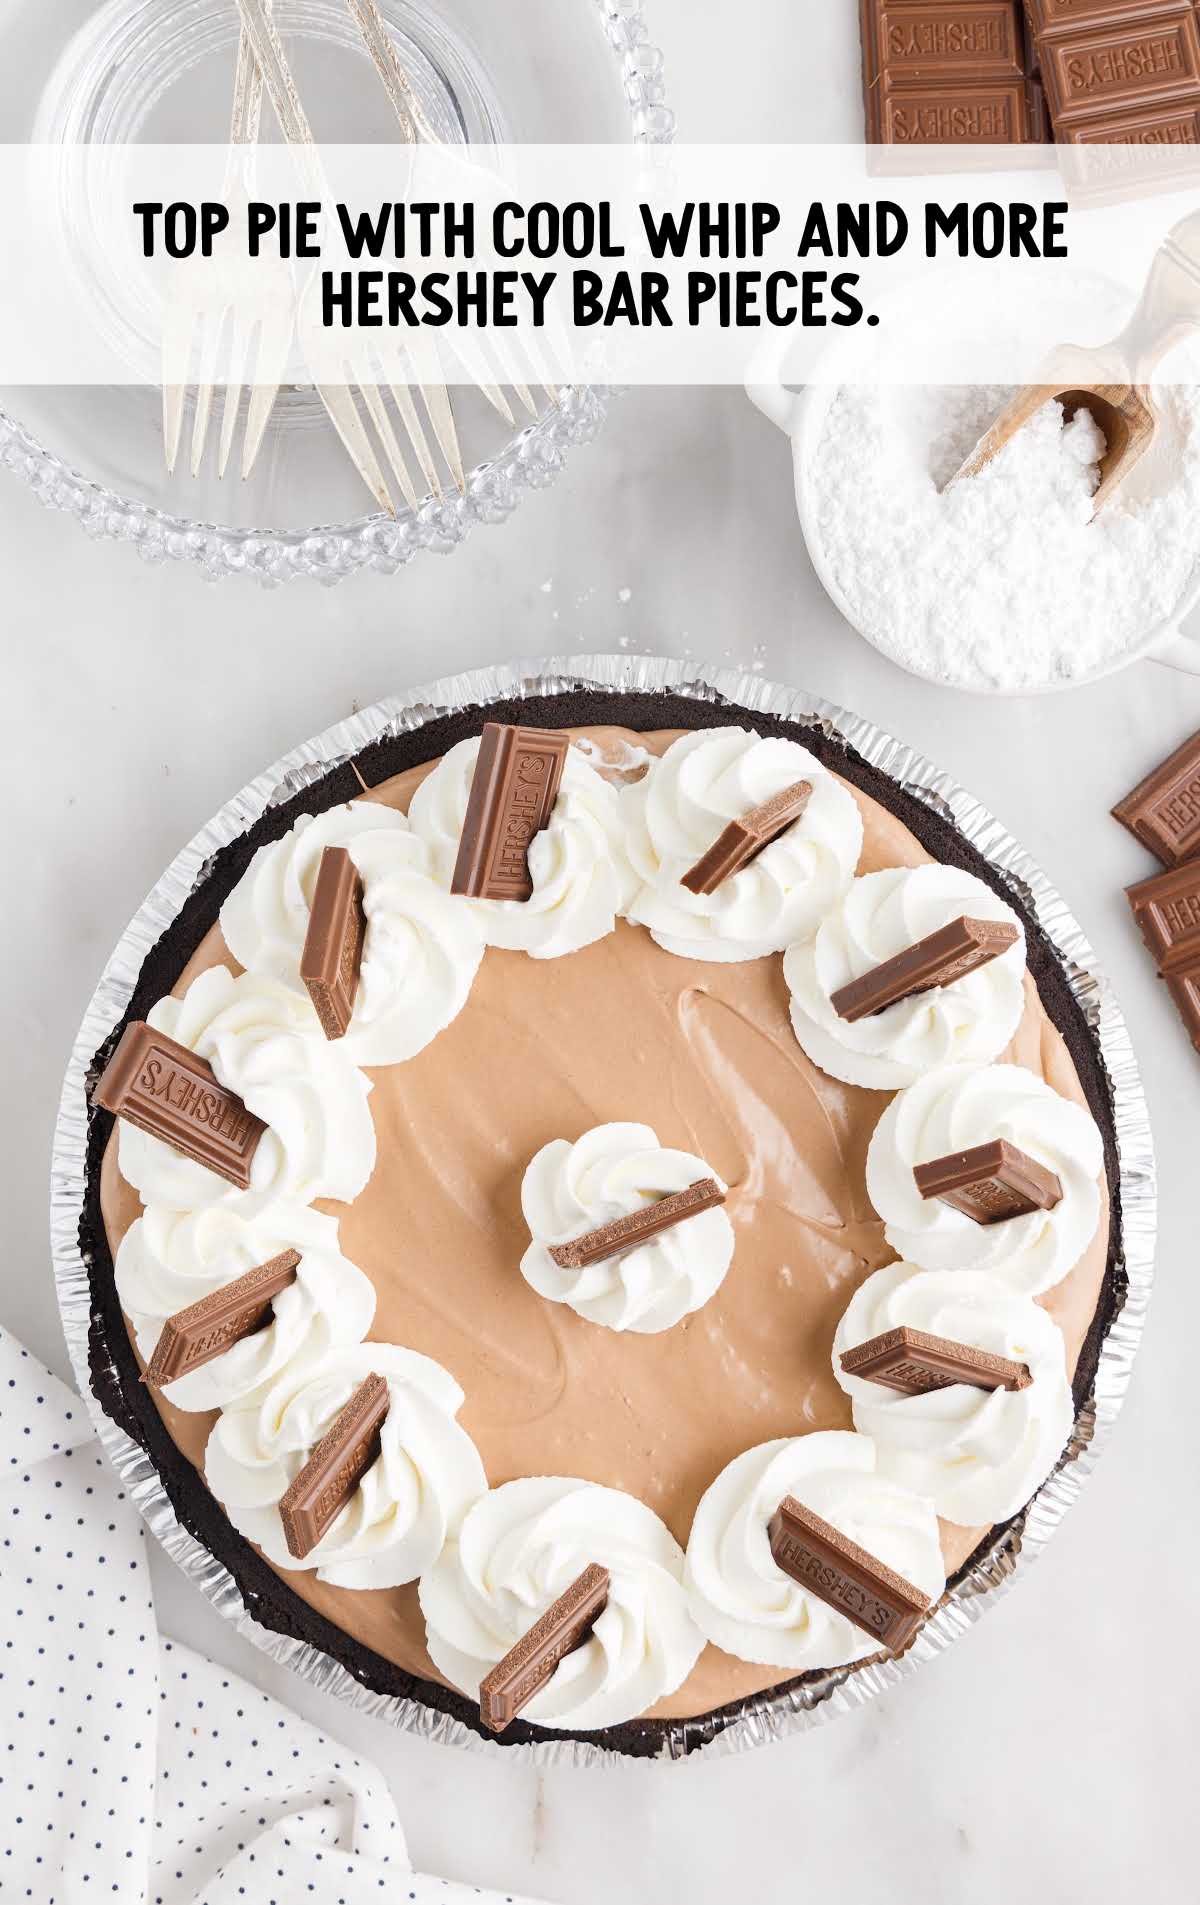 cool whip and Hershey bar pieces topped on top of the pie